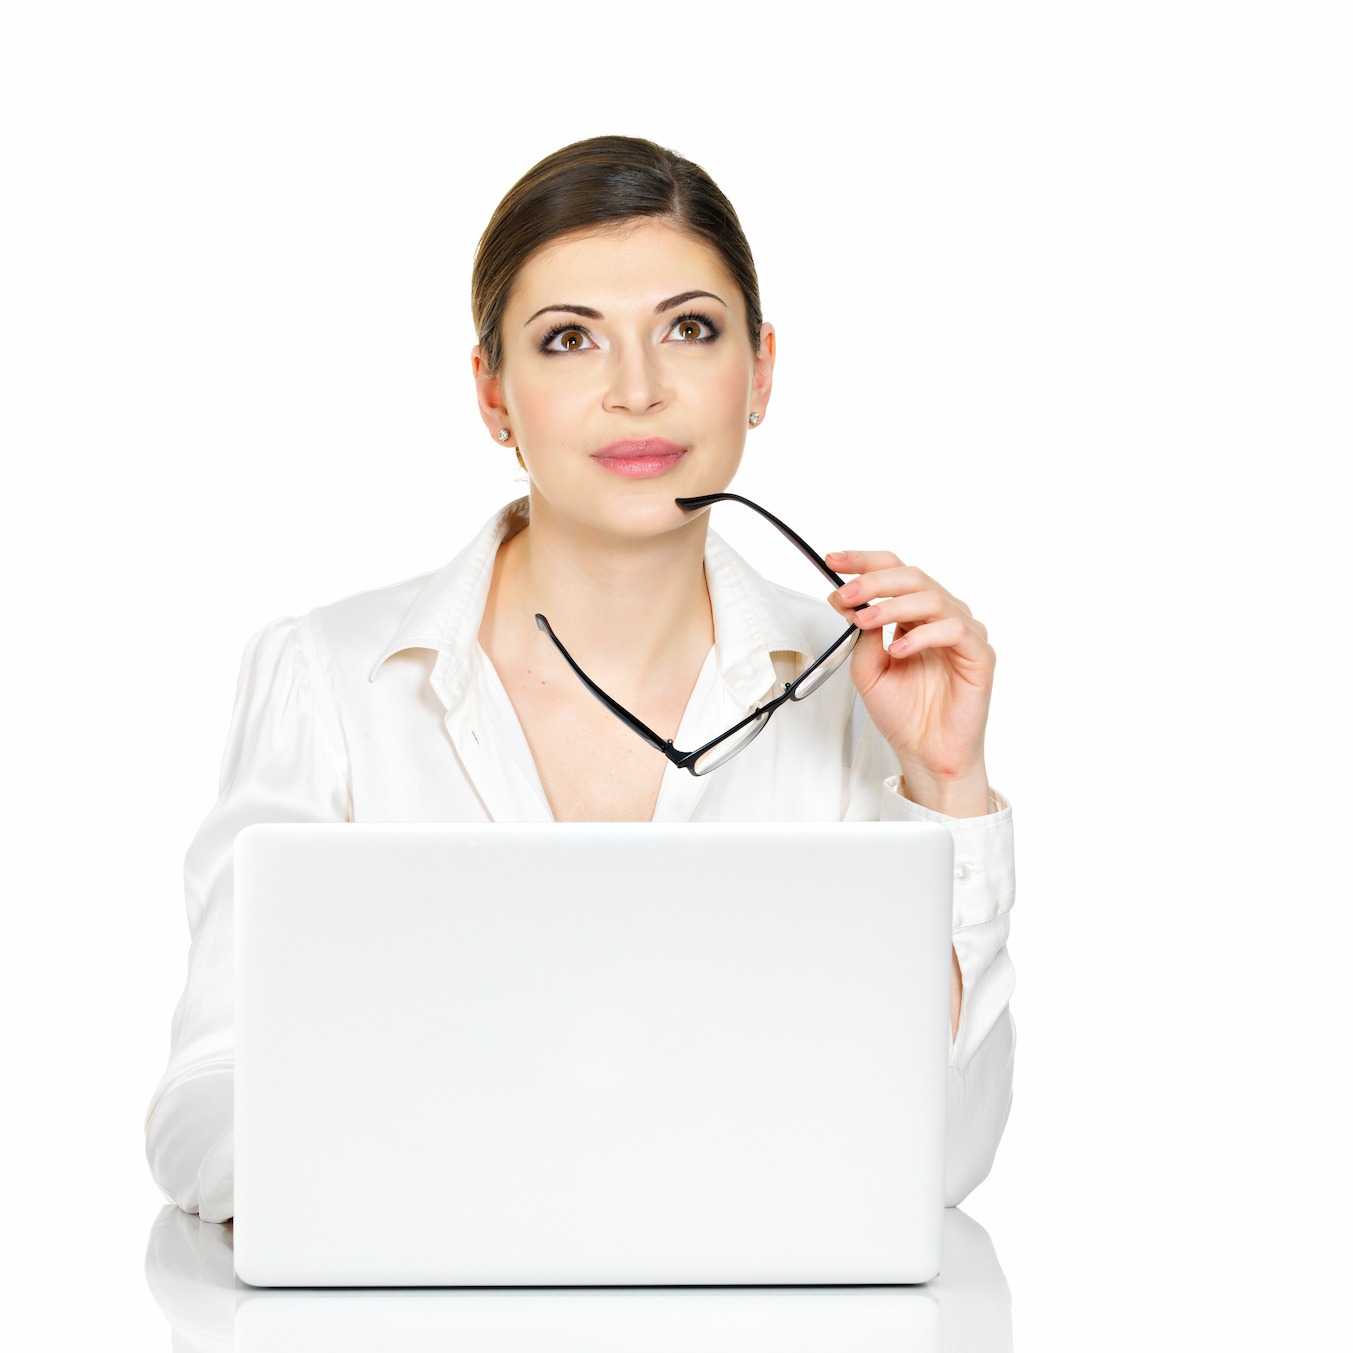 A professional woman holding eyeglasses sits in front of a laptop, looking thoughtfully upward, as she engages the given project by the digital media agency serivces